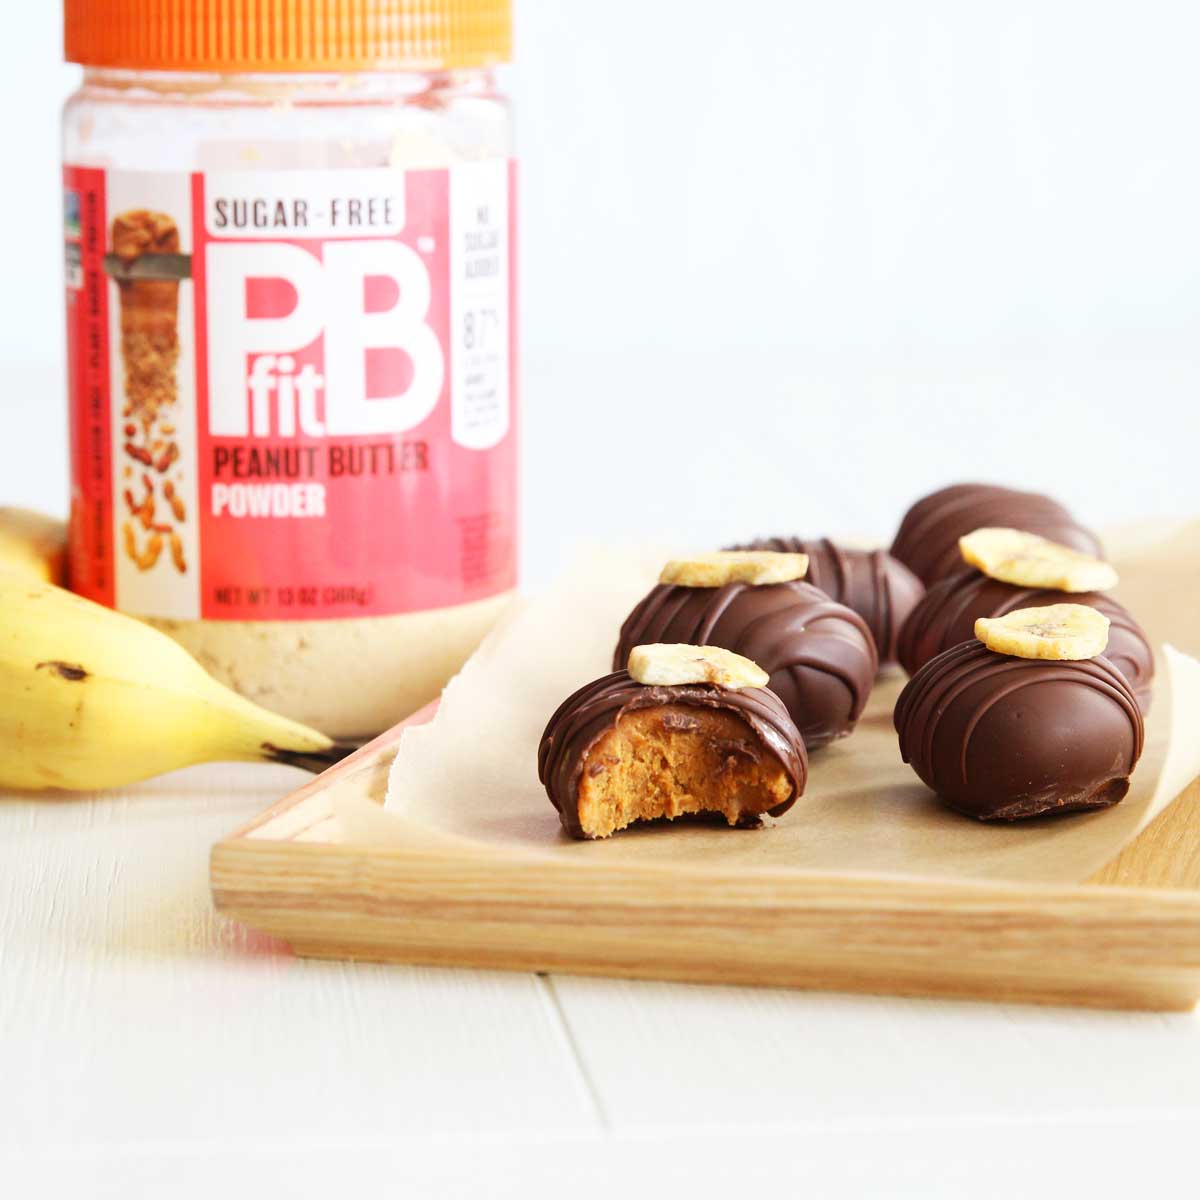 Easy & Delicious Banana Chocolate Easter Eggs Recipe with PB Fit - Only 3 Ingredients! - Caramel Apple Dip